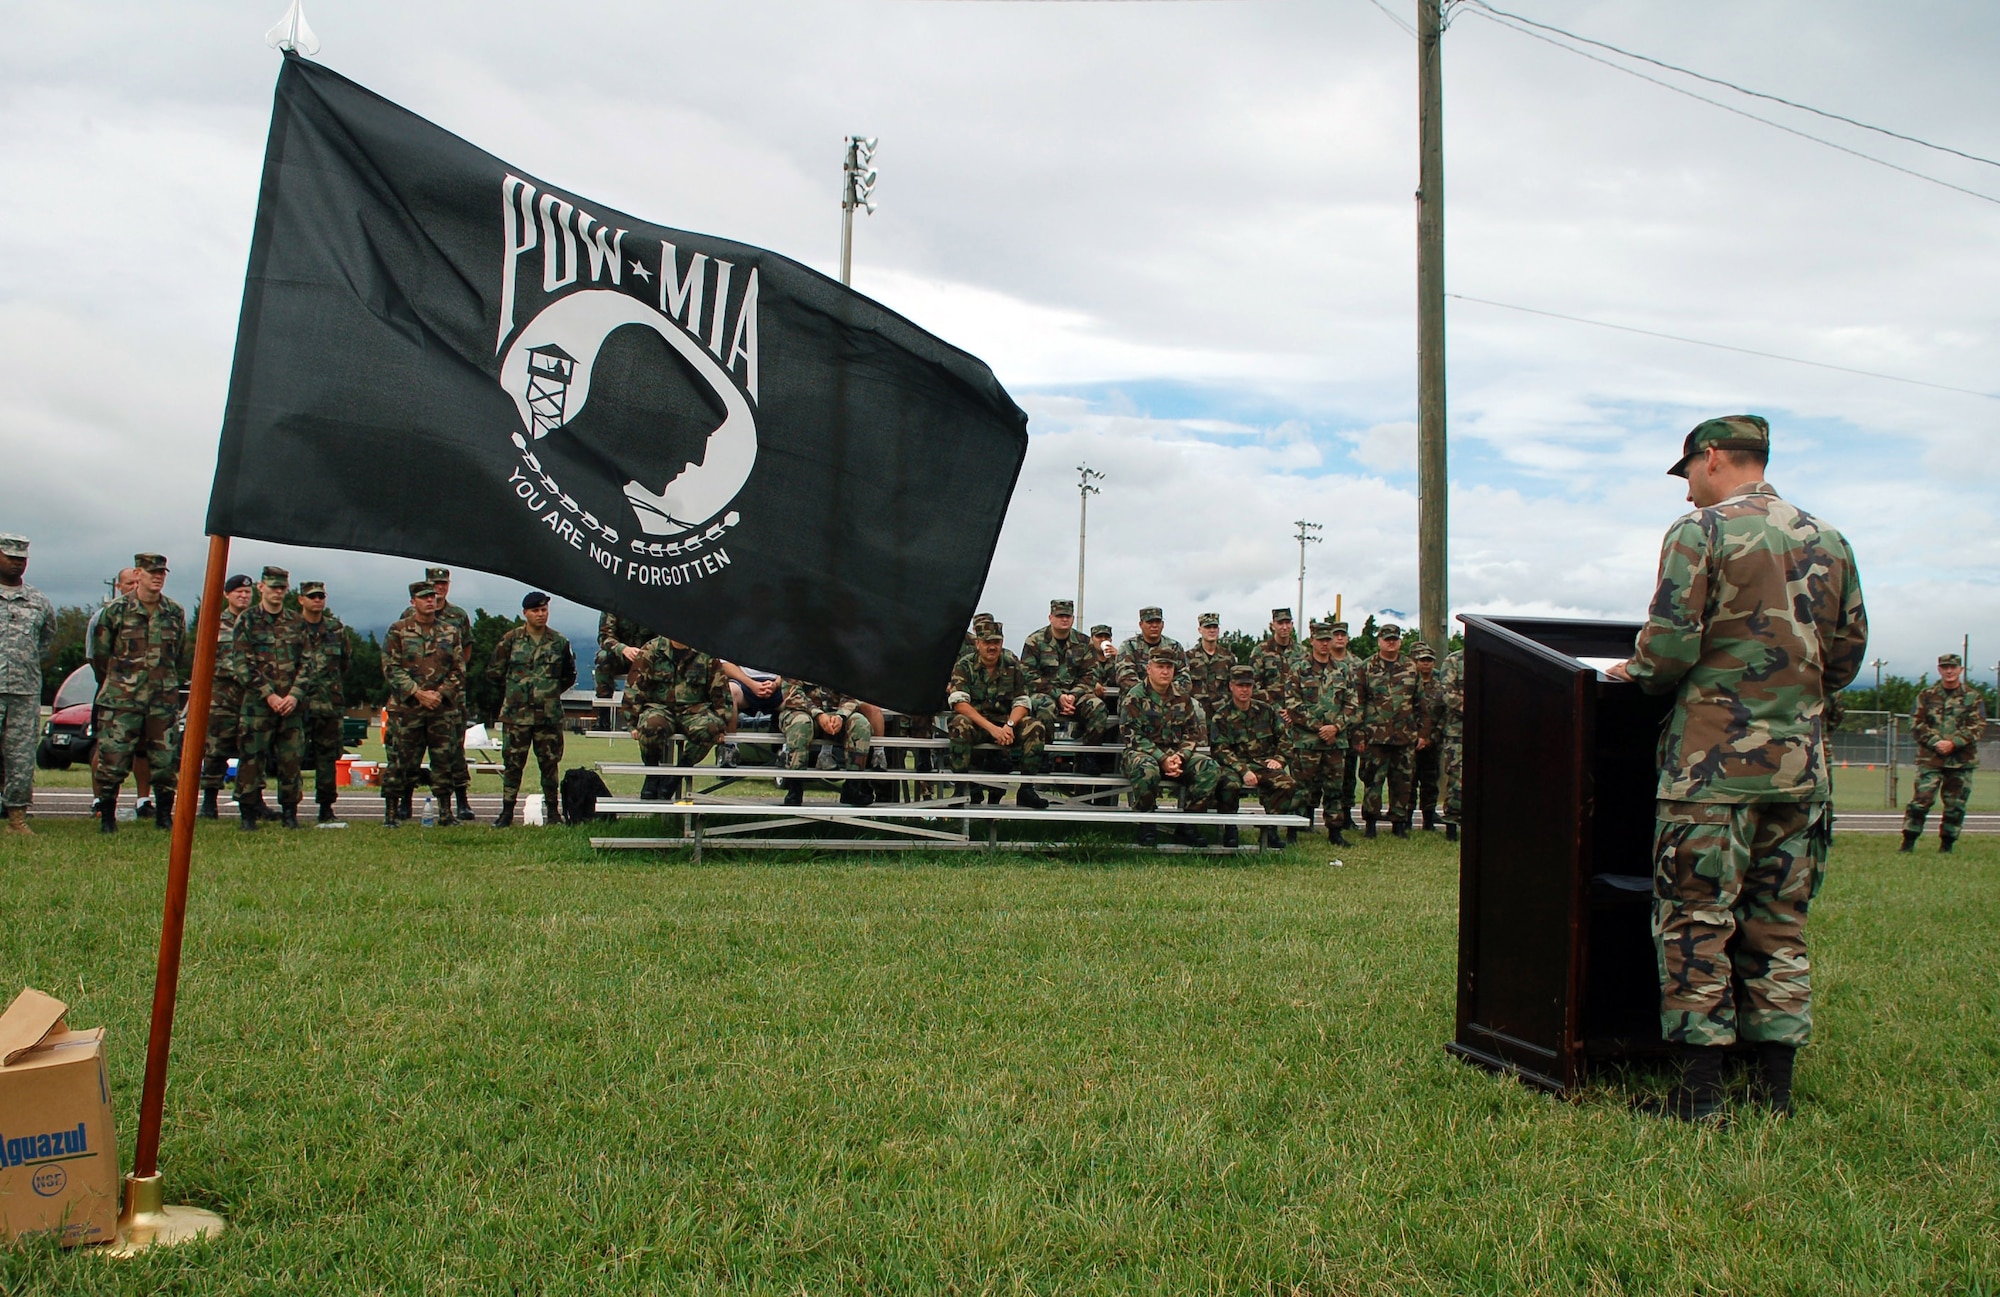 SOTO CANO AIR BASE, Honduras – Following the completion of a 24-hour Prisoner of War/Missing in Action Remembrance Run, Air Force Col. Howard Jones, Joint Task Force-Bravo deputy commander, delivers a speech explaining the importance of remembrance.  A total of approximately 170 participants ran in mostly 15-minute intervals for 24 hours to show support for their fellow servicemembers who have been listed as POW/MIA.  (U.S. Air Force photo by Staff Sgt. Austin M. May)